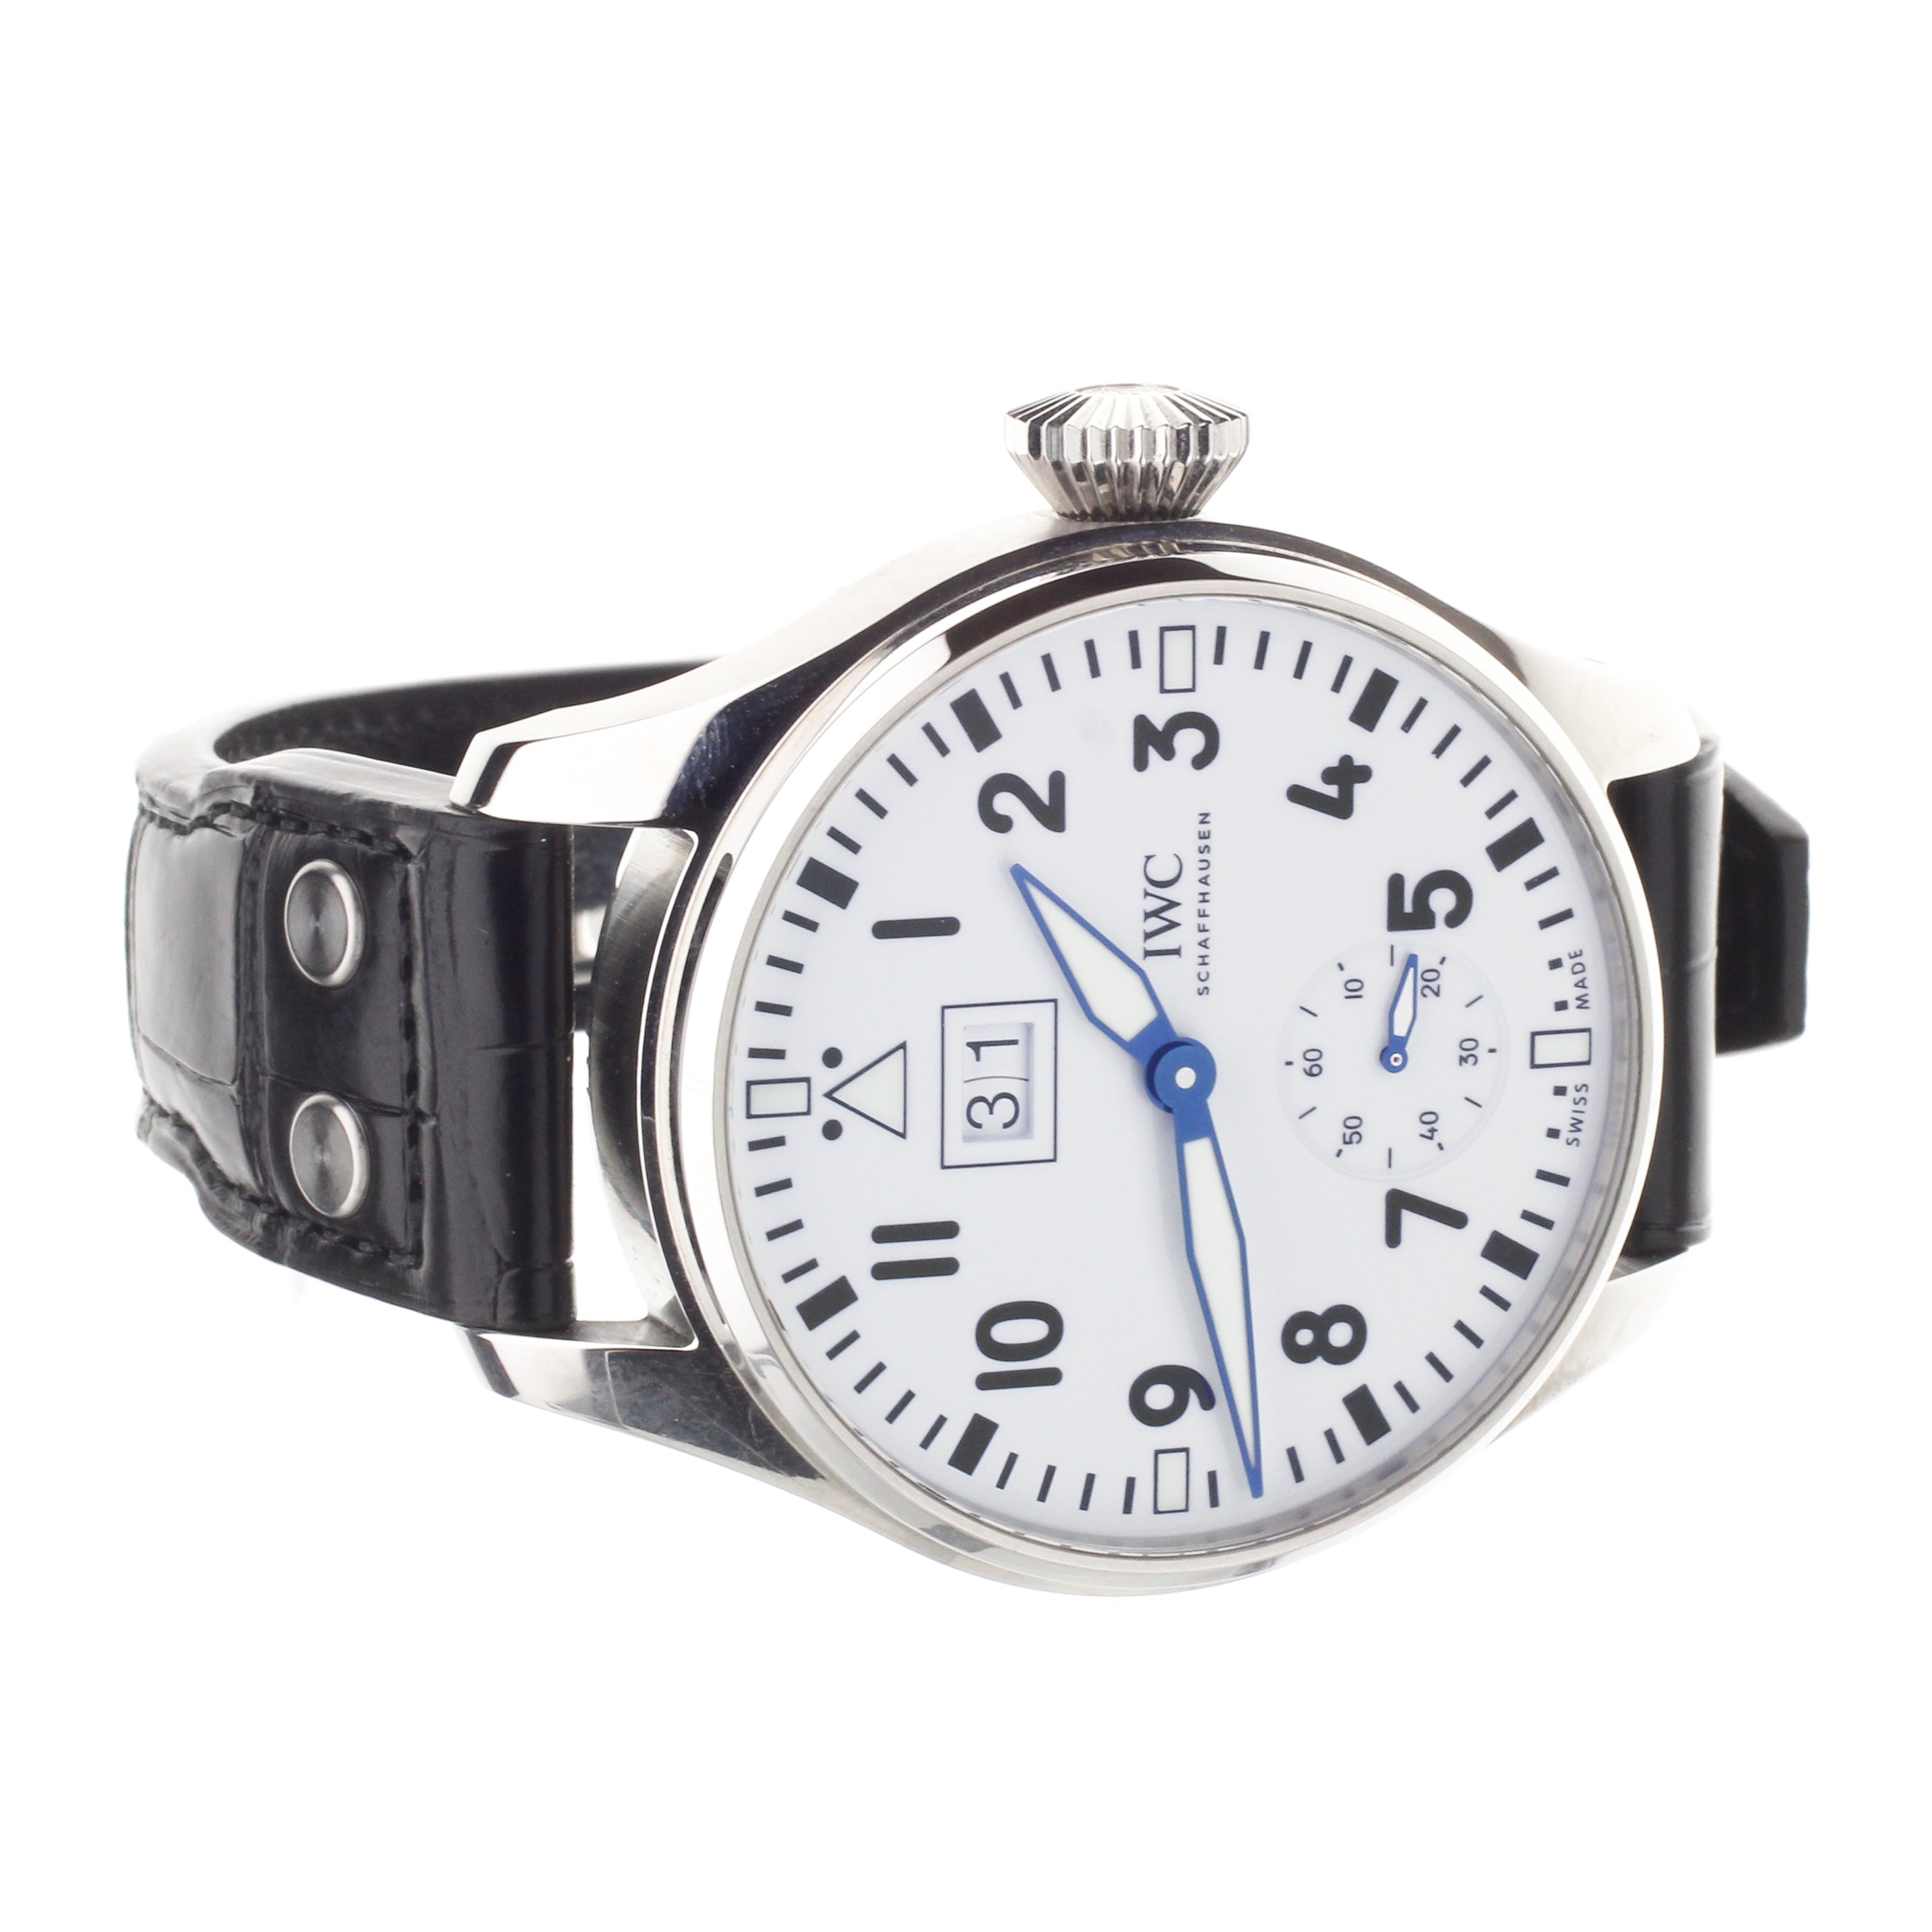 IWC Big Pilot's Watch Big Date Jubilee White Lacquer Dial 46mm IW510504 Full Set